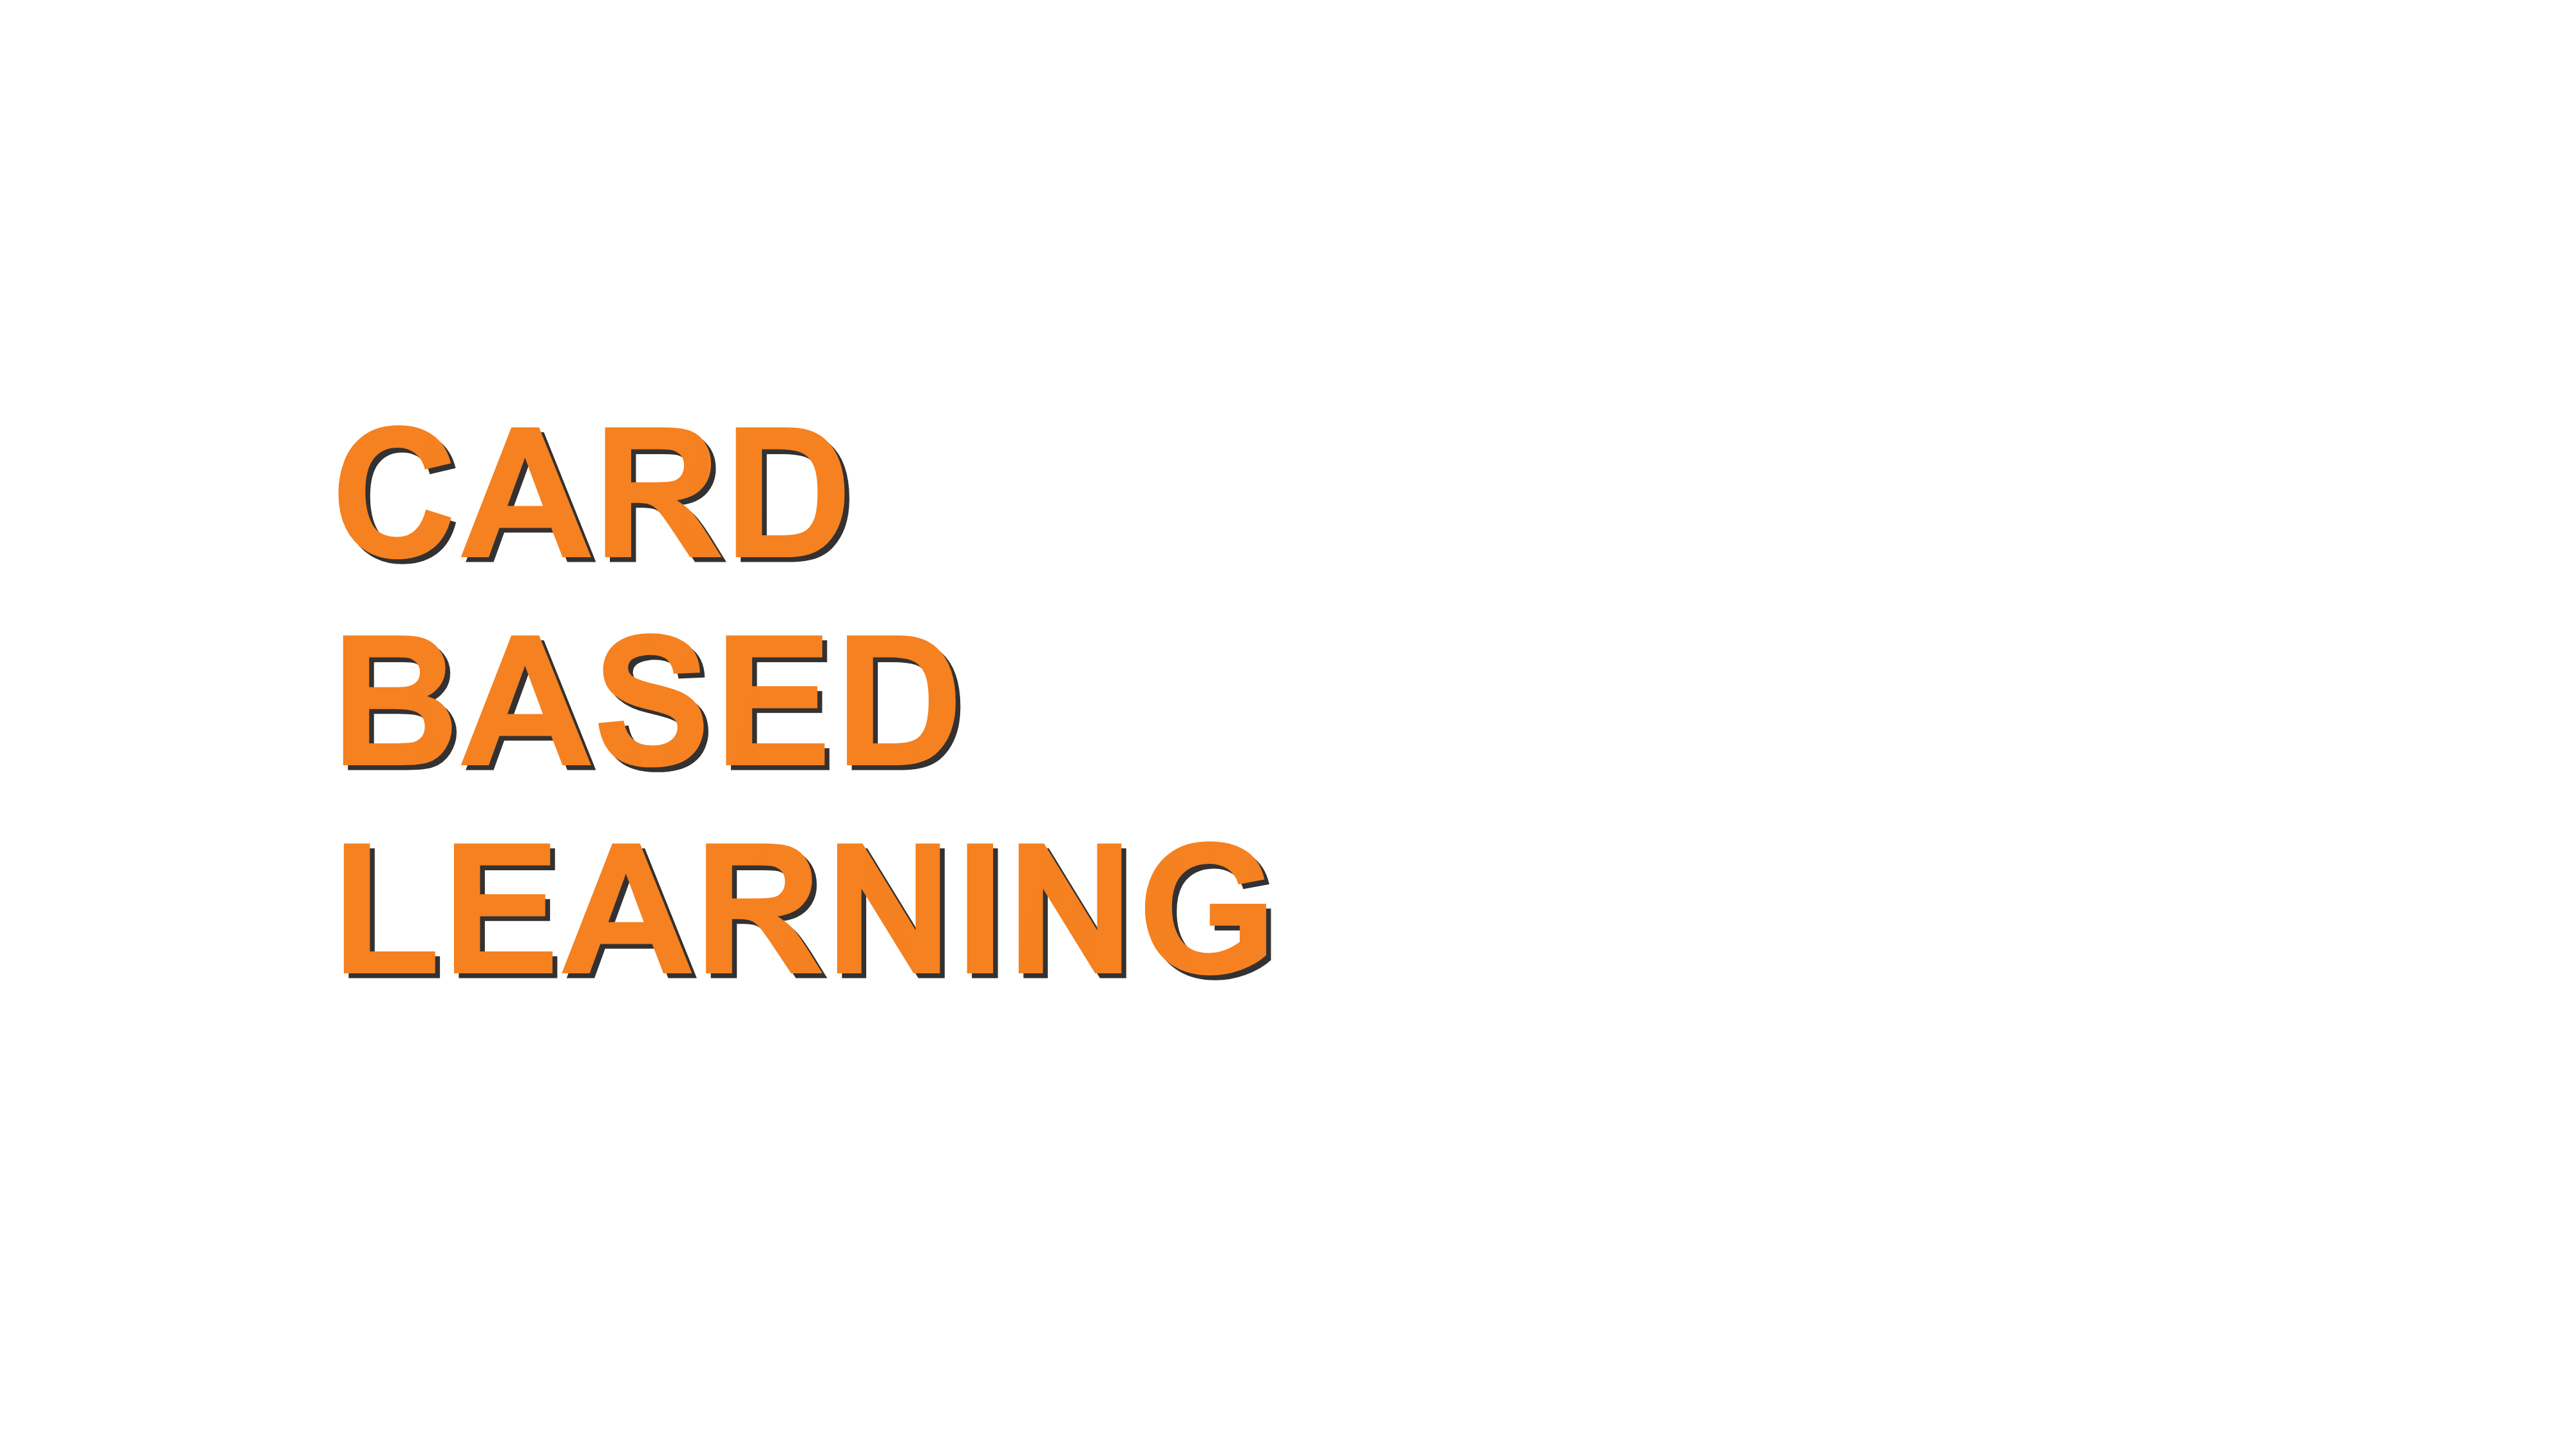 Card Based Learning Text